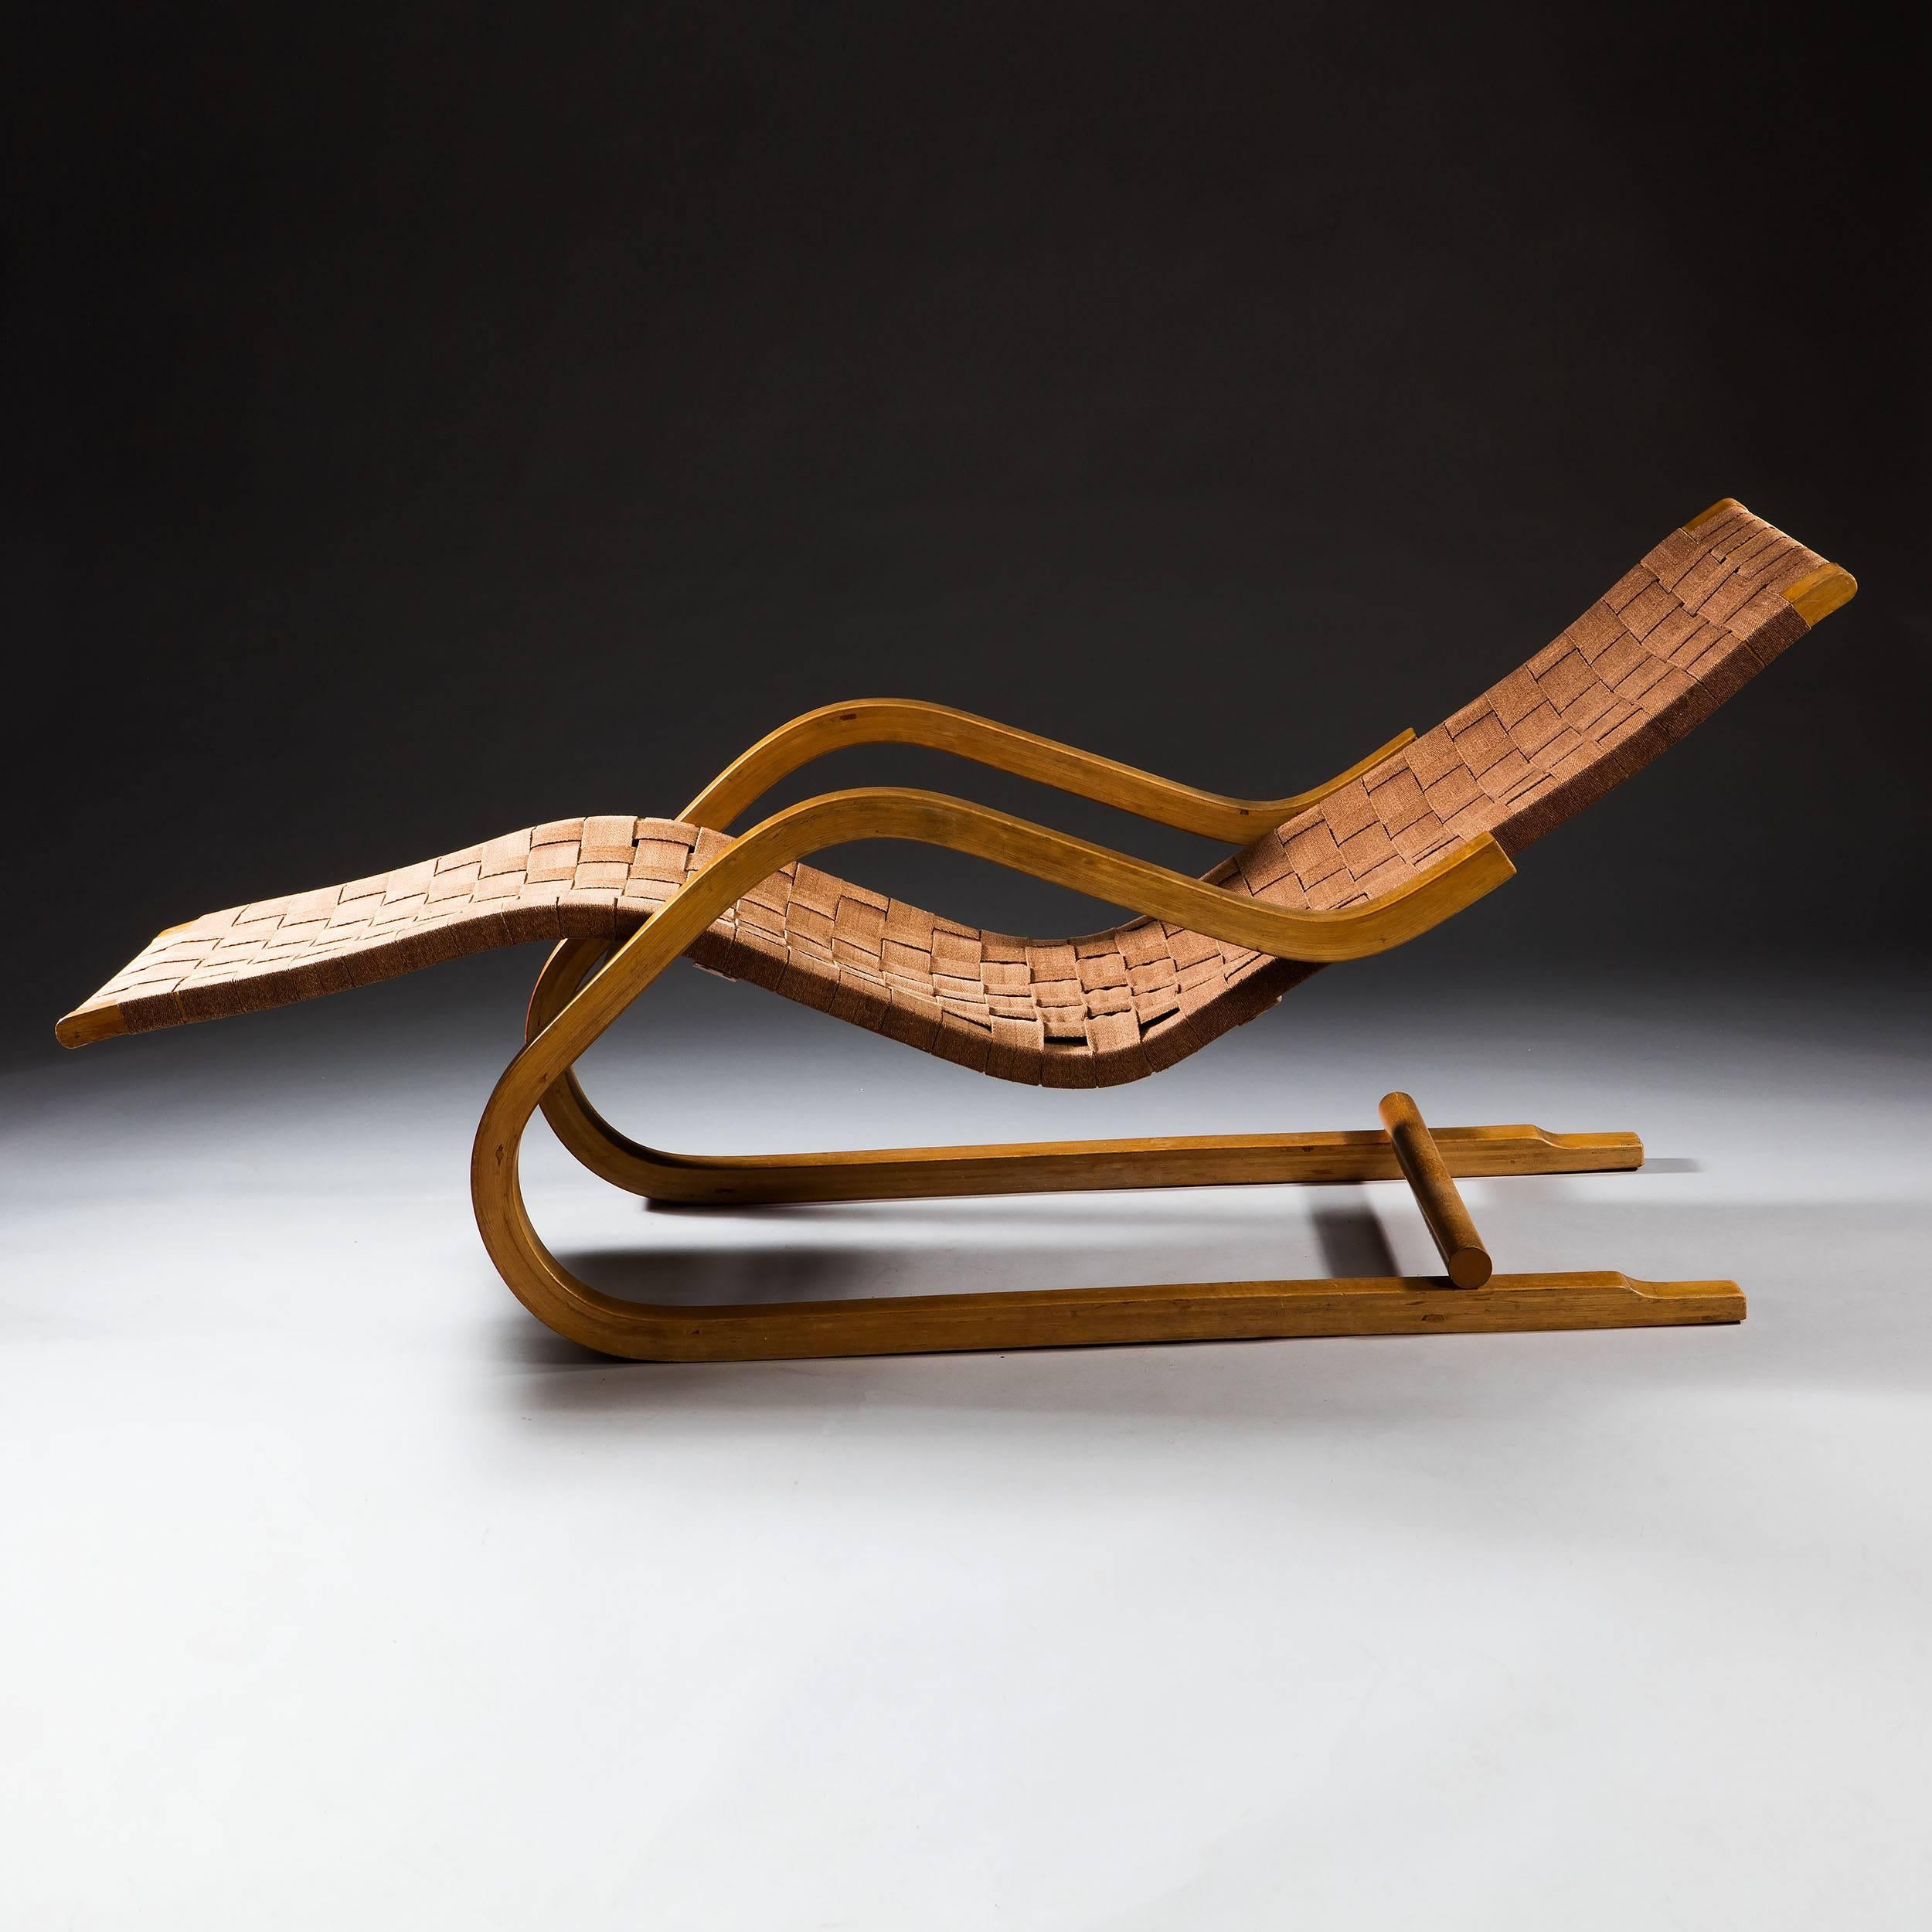 A fine mid-20th century bent birch and webbed chaise longue design by Alvar Aalto.